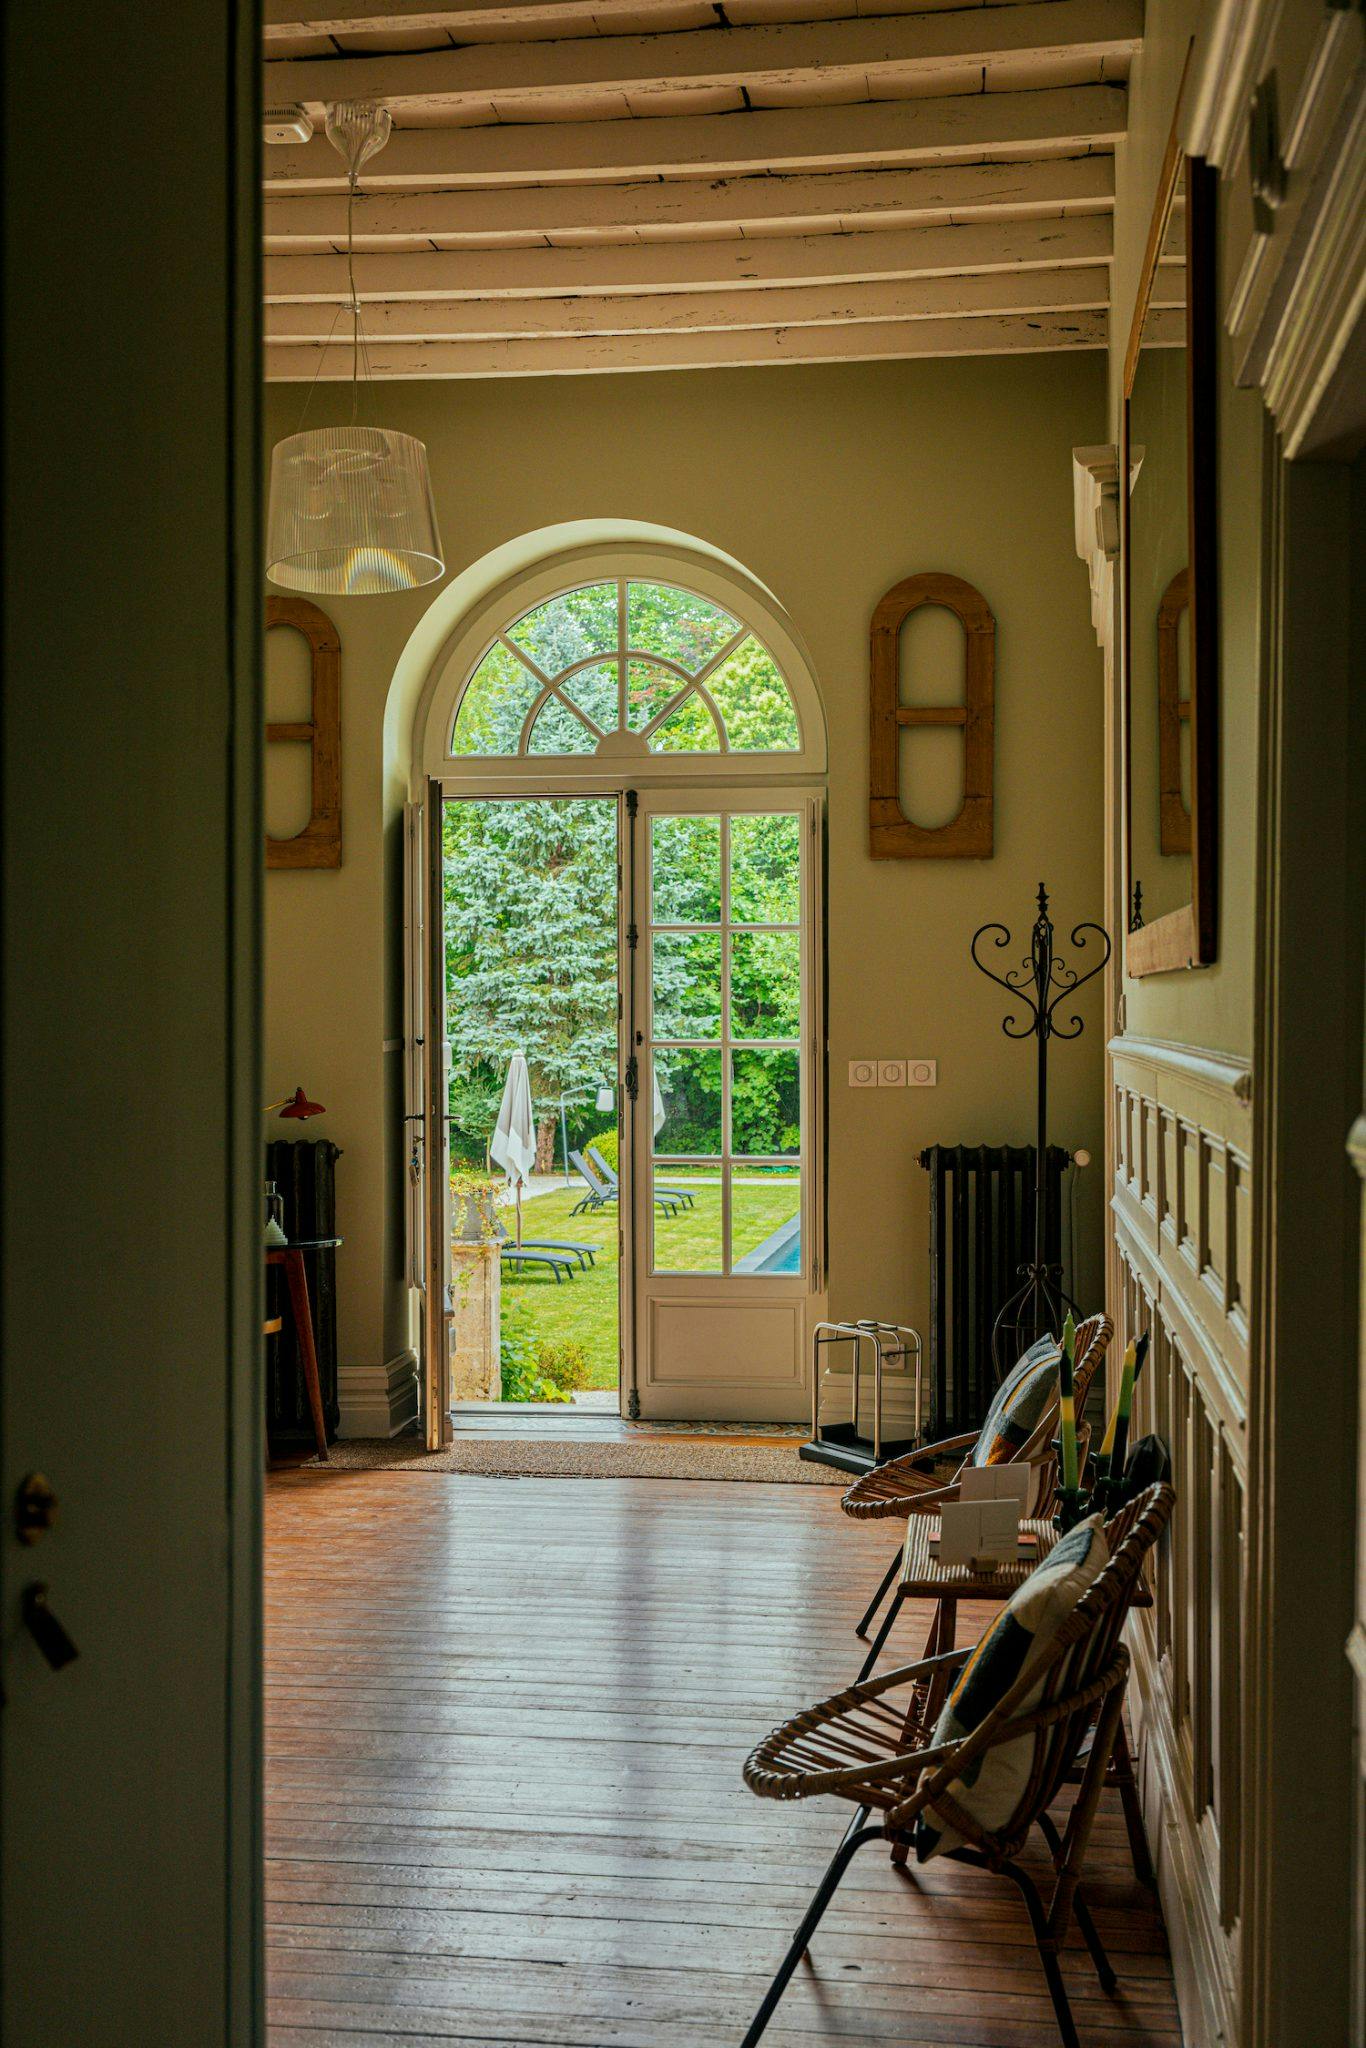 Entrance to the manor house, arched glass door and wood panelling